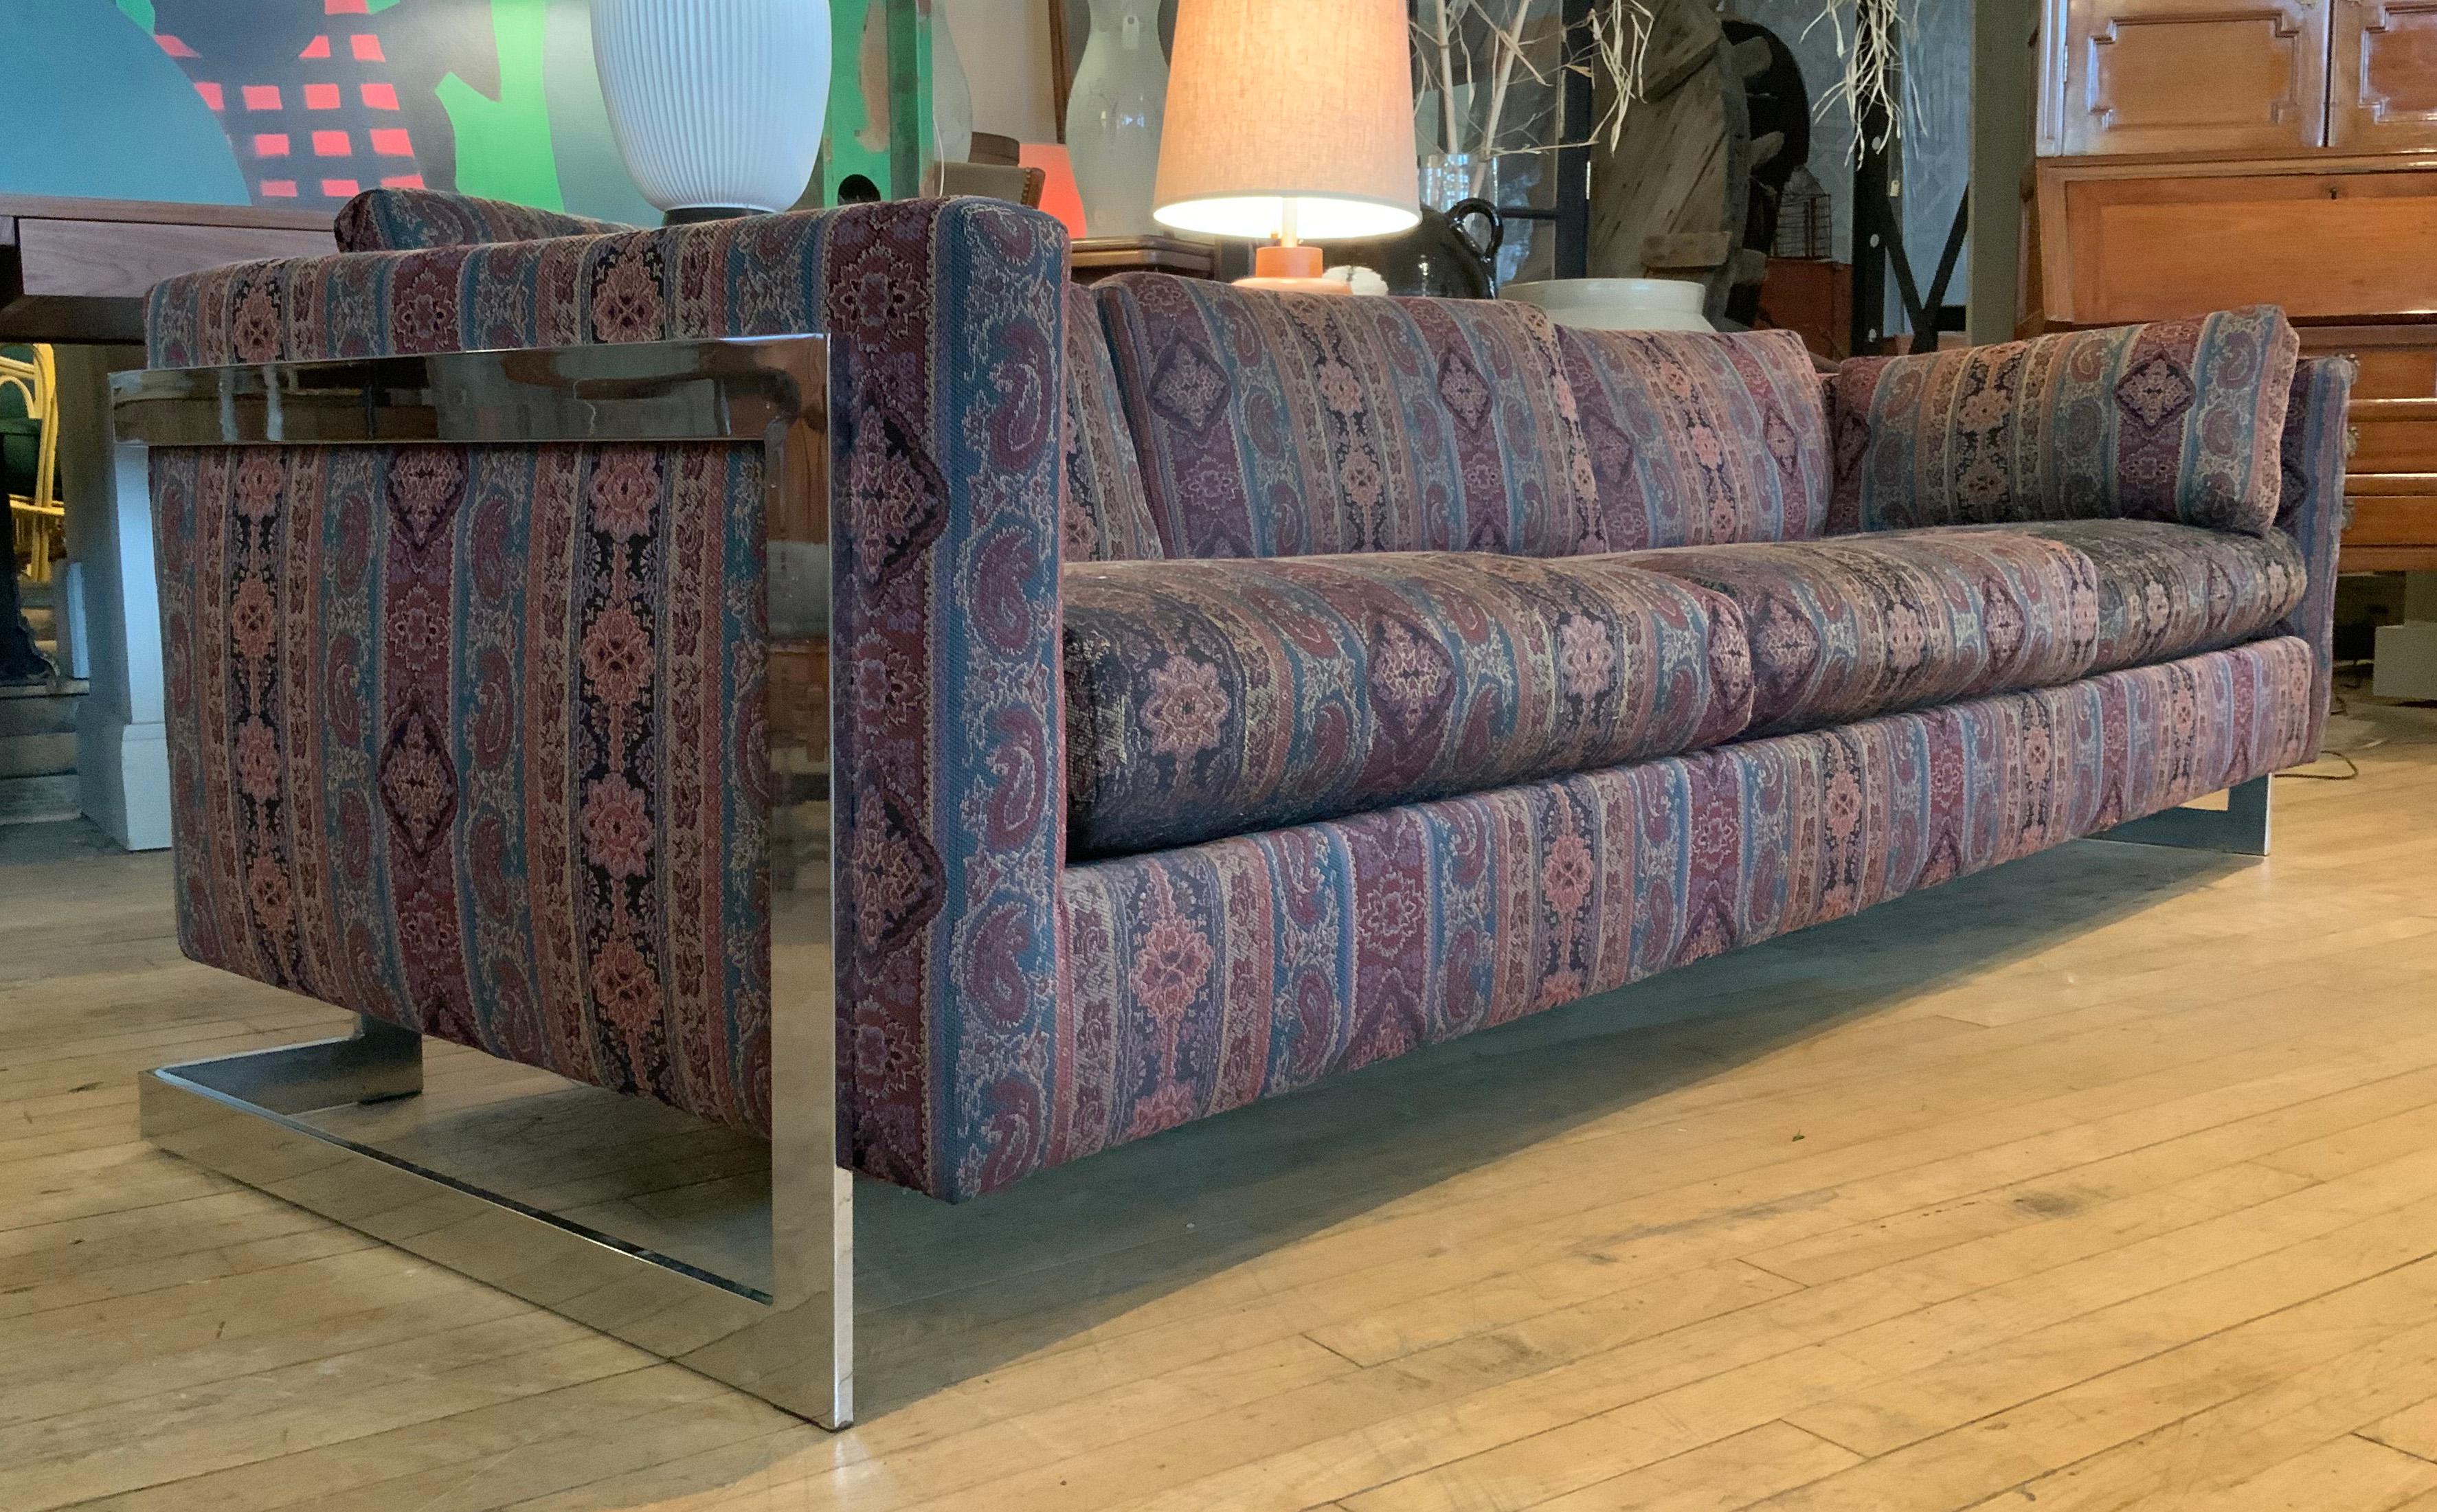 a beautiful 1960's three seat sofa by Milo Baughman, with a stunning chrome frame the holds the sofa 'floating' in the frame -- great design and very well made and in perfect condition. the sofa was reupholstered in the 1990's, and the fabric is in